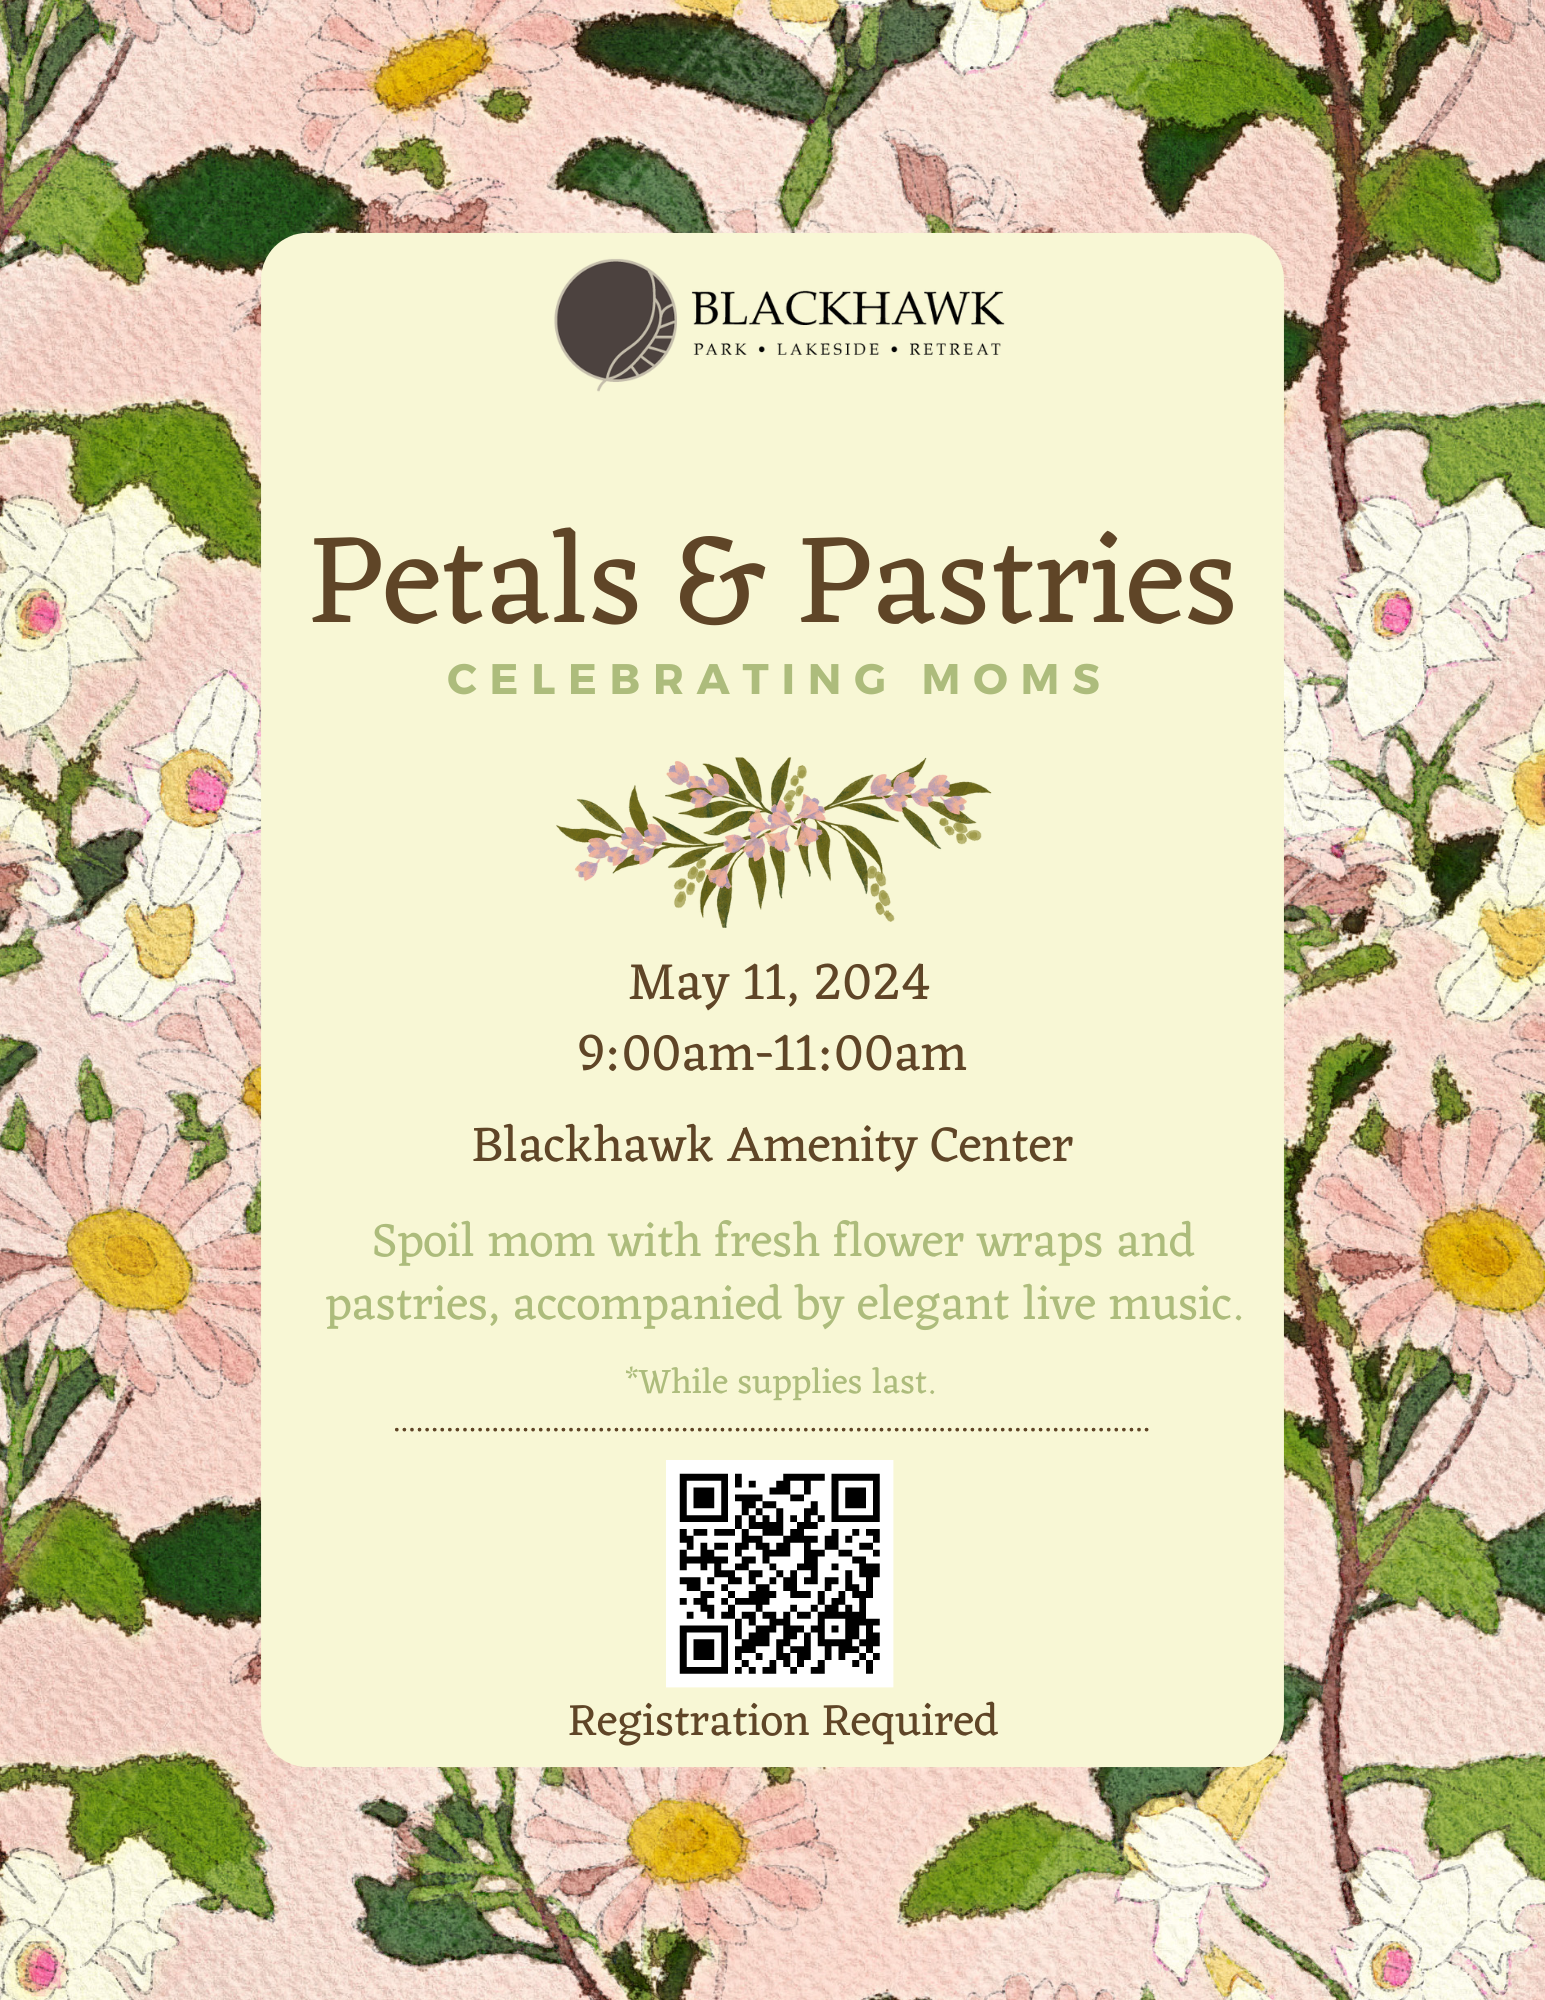 A floral-themed event flyer for 'Petals & Pastries', celebrating mothers on May 11, 2024, from 9:00 am to 11:00 am at Blackhawk Amenity Center. The background is a watercolor illustration of pink and yellow flowers. The flyer details an offer to 'spoil mom with fresh flower wraps and pastries, accompanied by elegant live music.' A QR code for registration and a note stating 'Registration Required' is at the bottom, with an asterisked disclaimer 'While supplies last.'